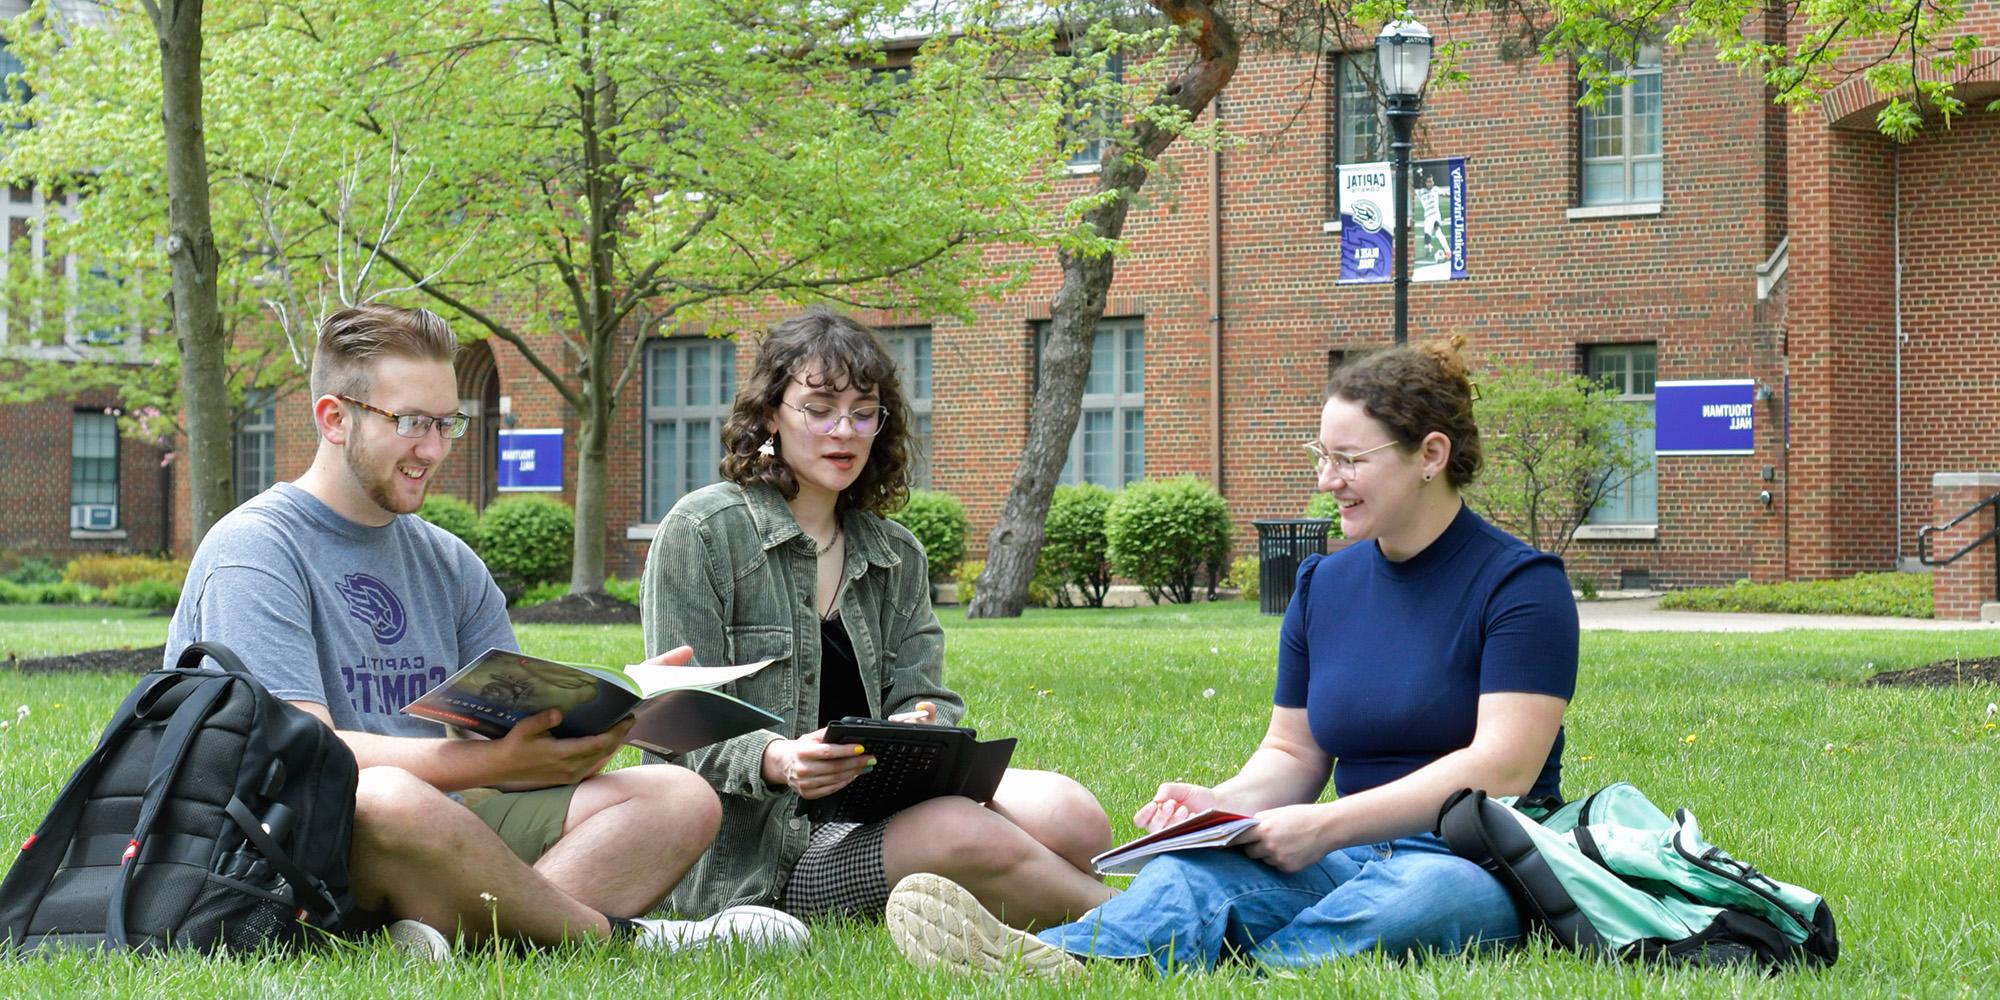 Students Sitting On Lawn In Quad